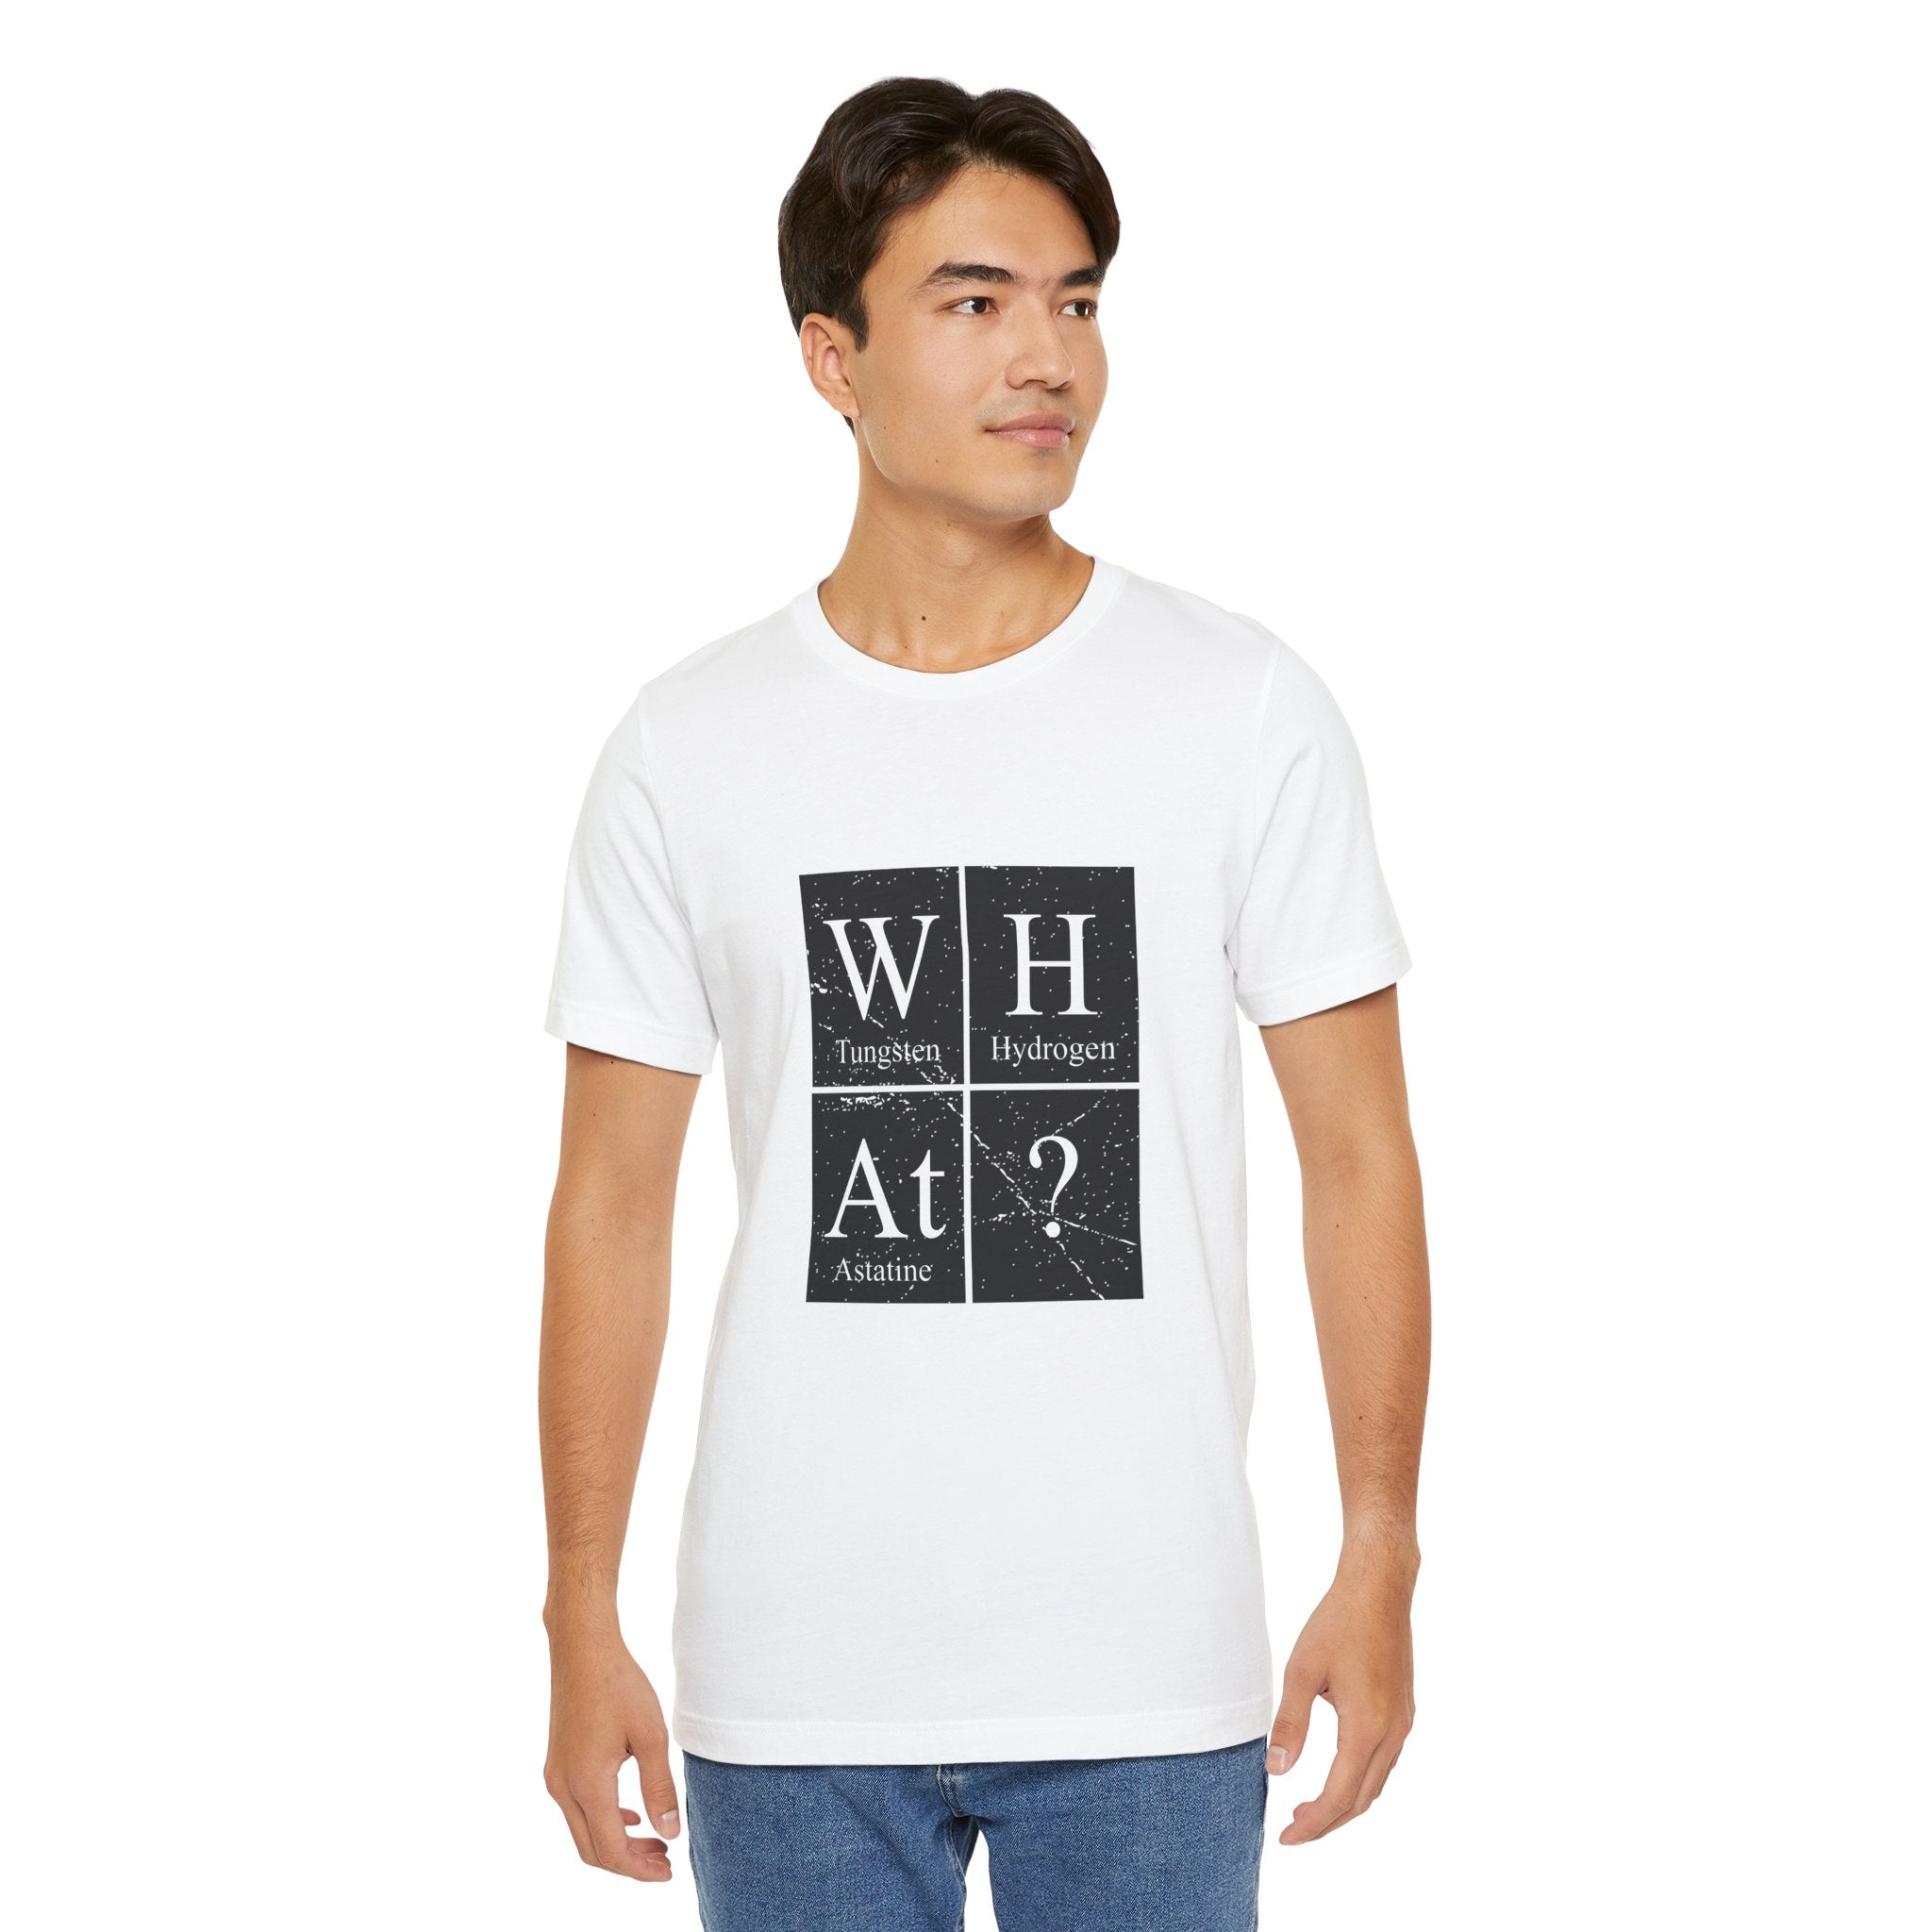 Young man in a white unisex jersey tee with a periodic table design featuring the elements W-H-At-?